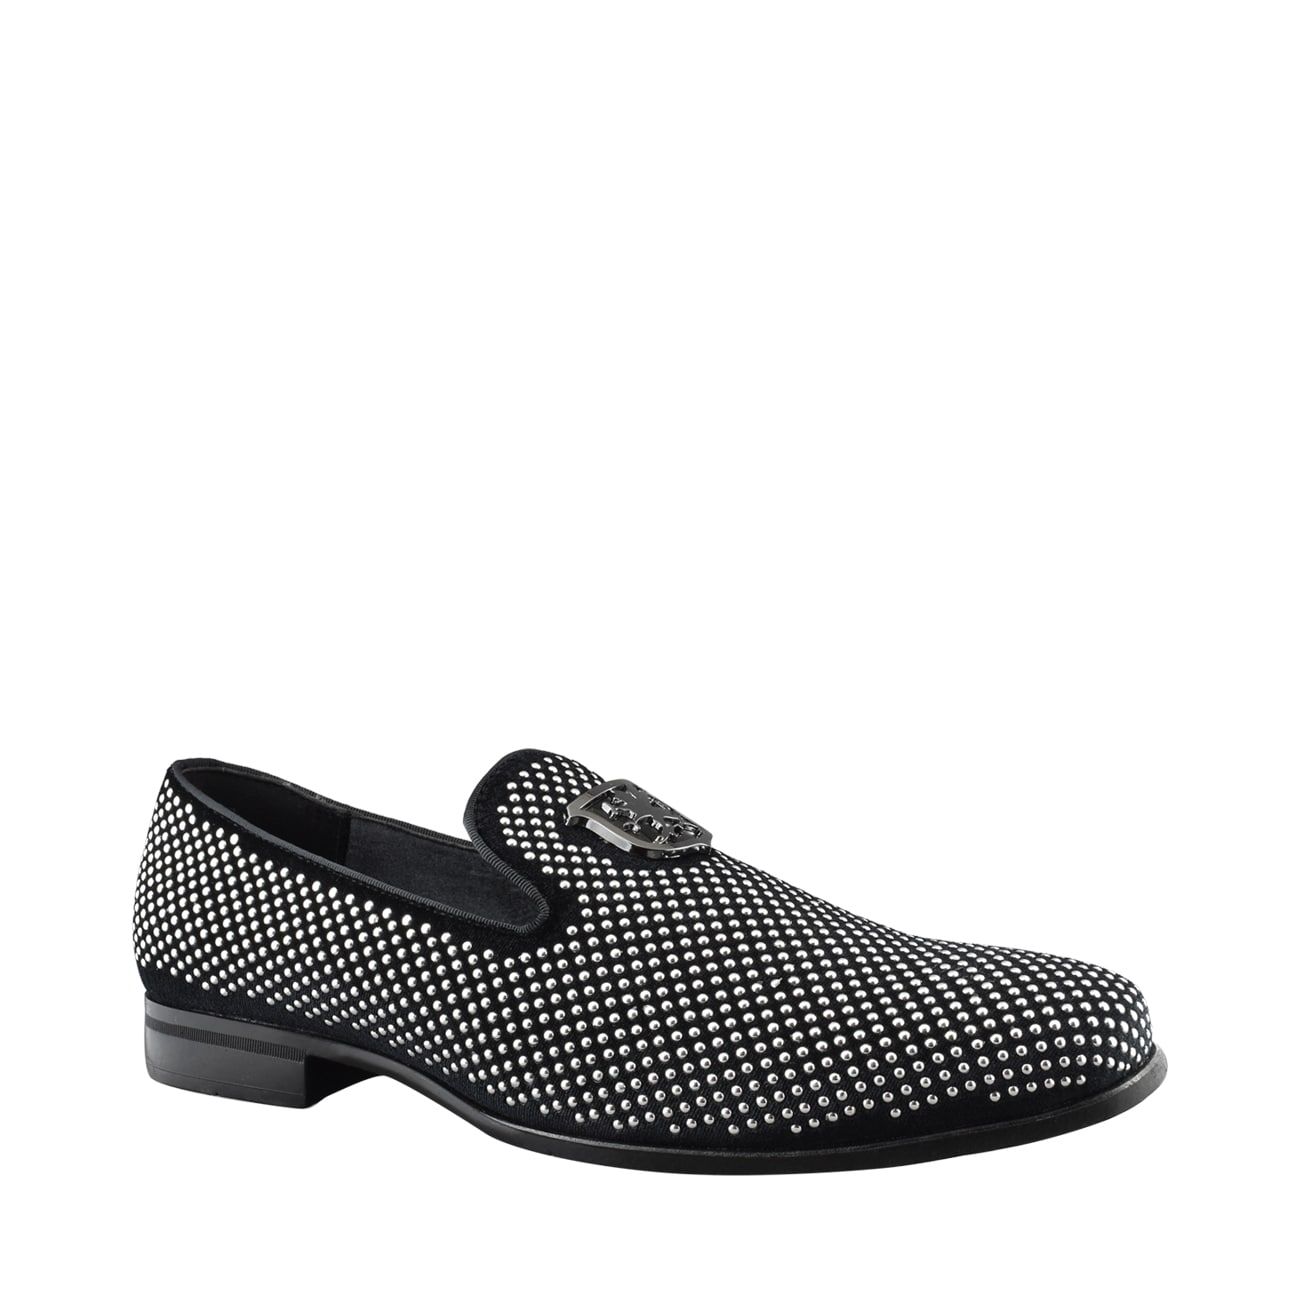 stacy adams swagger loafer